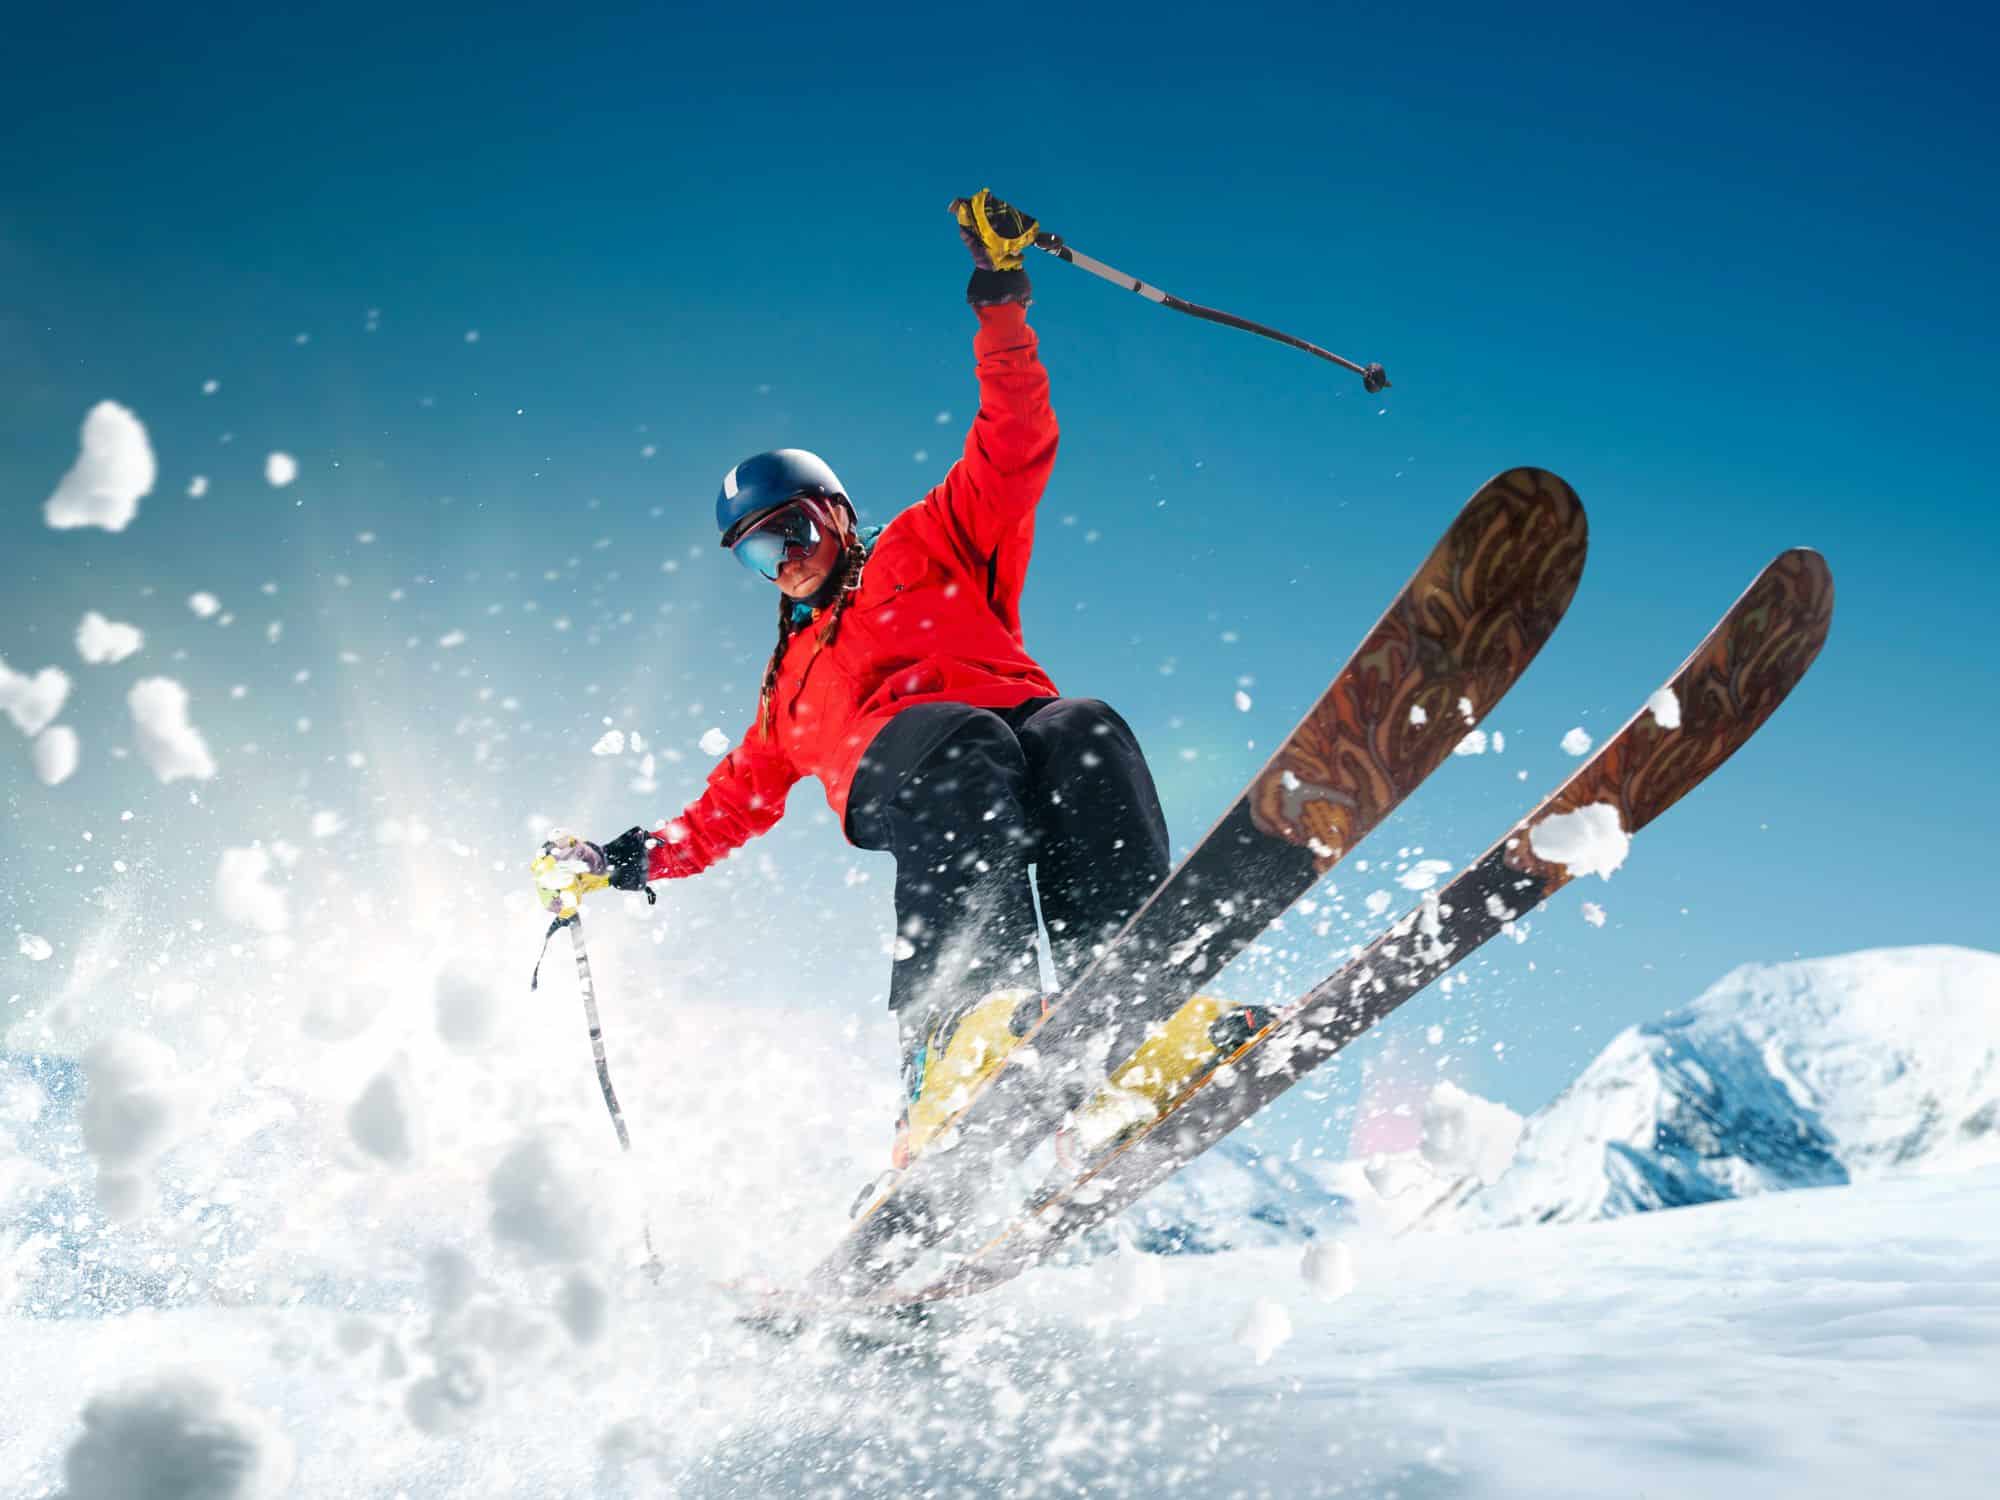 What to pack for a ski trip - ski through powder in a red top